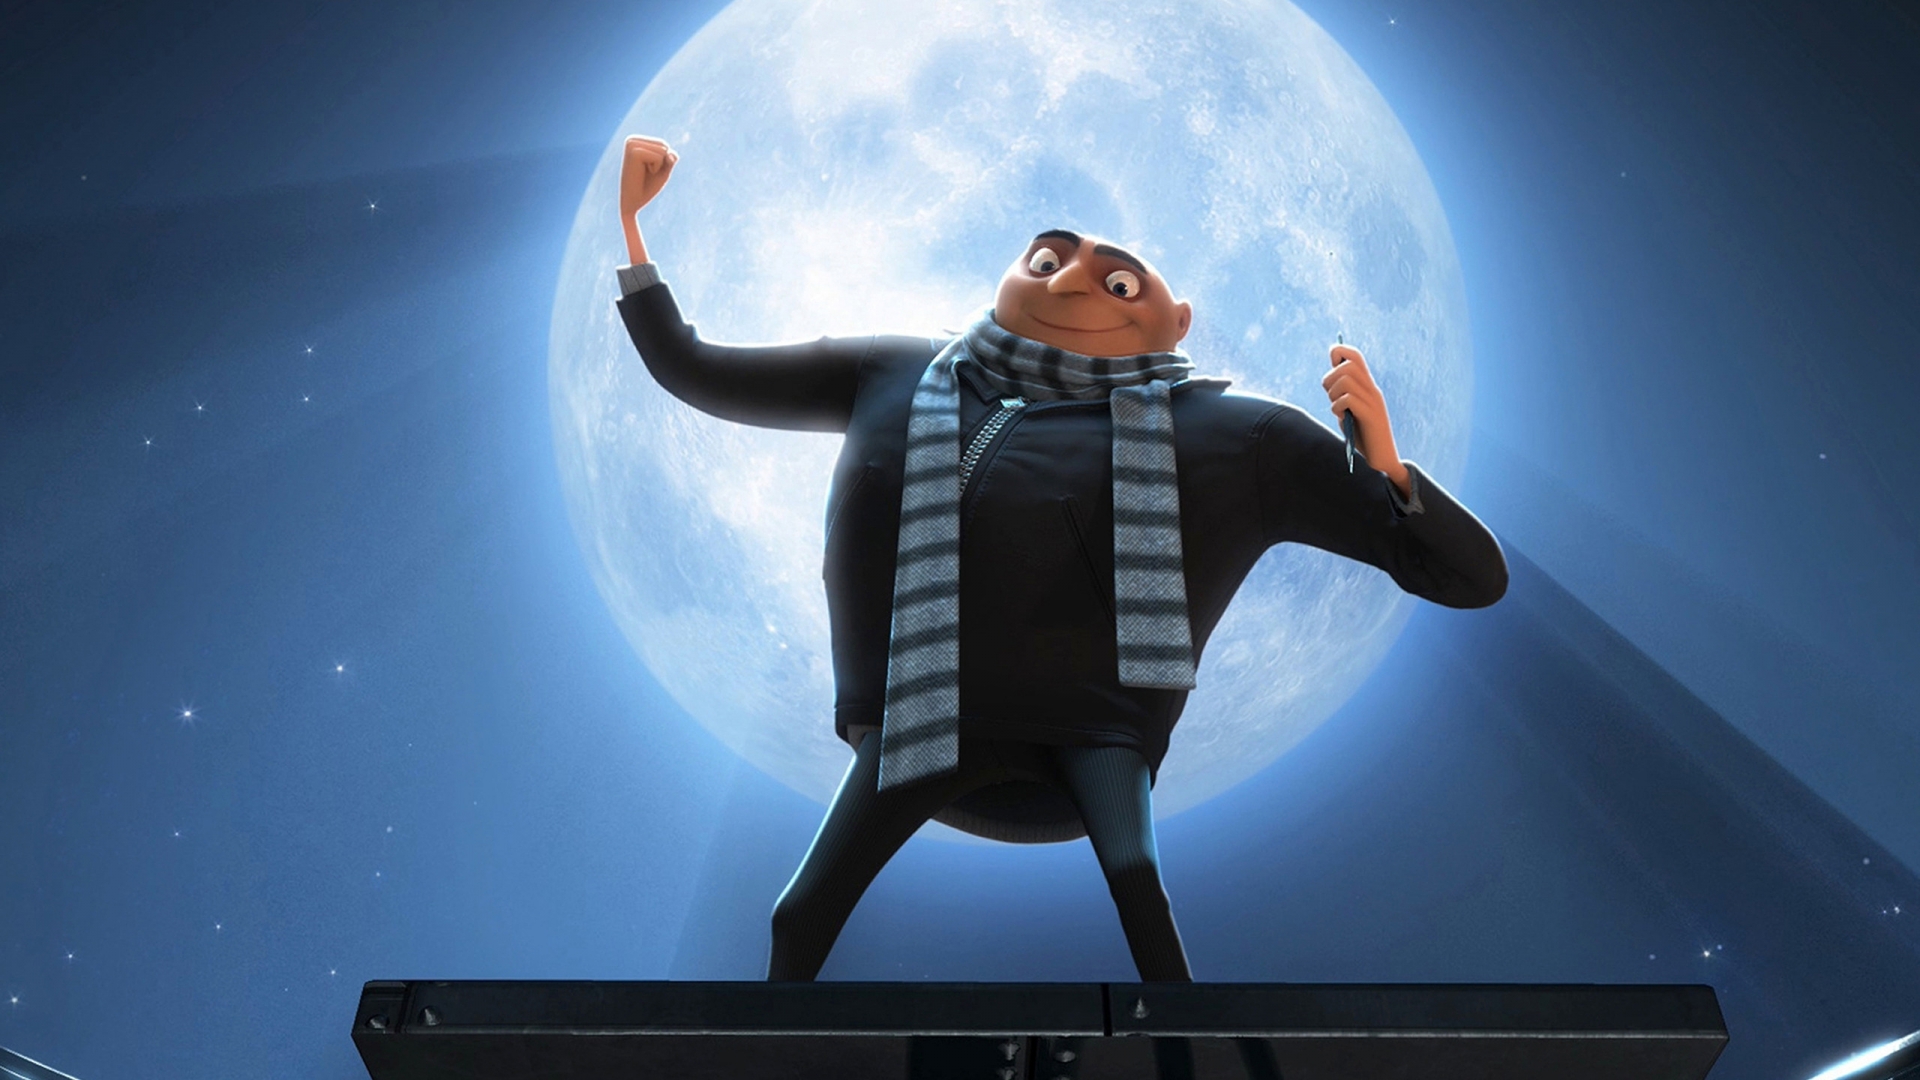 Despicable Me Gru for 1920 x 1080 HDTV 1080p resolution